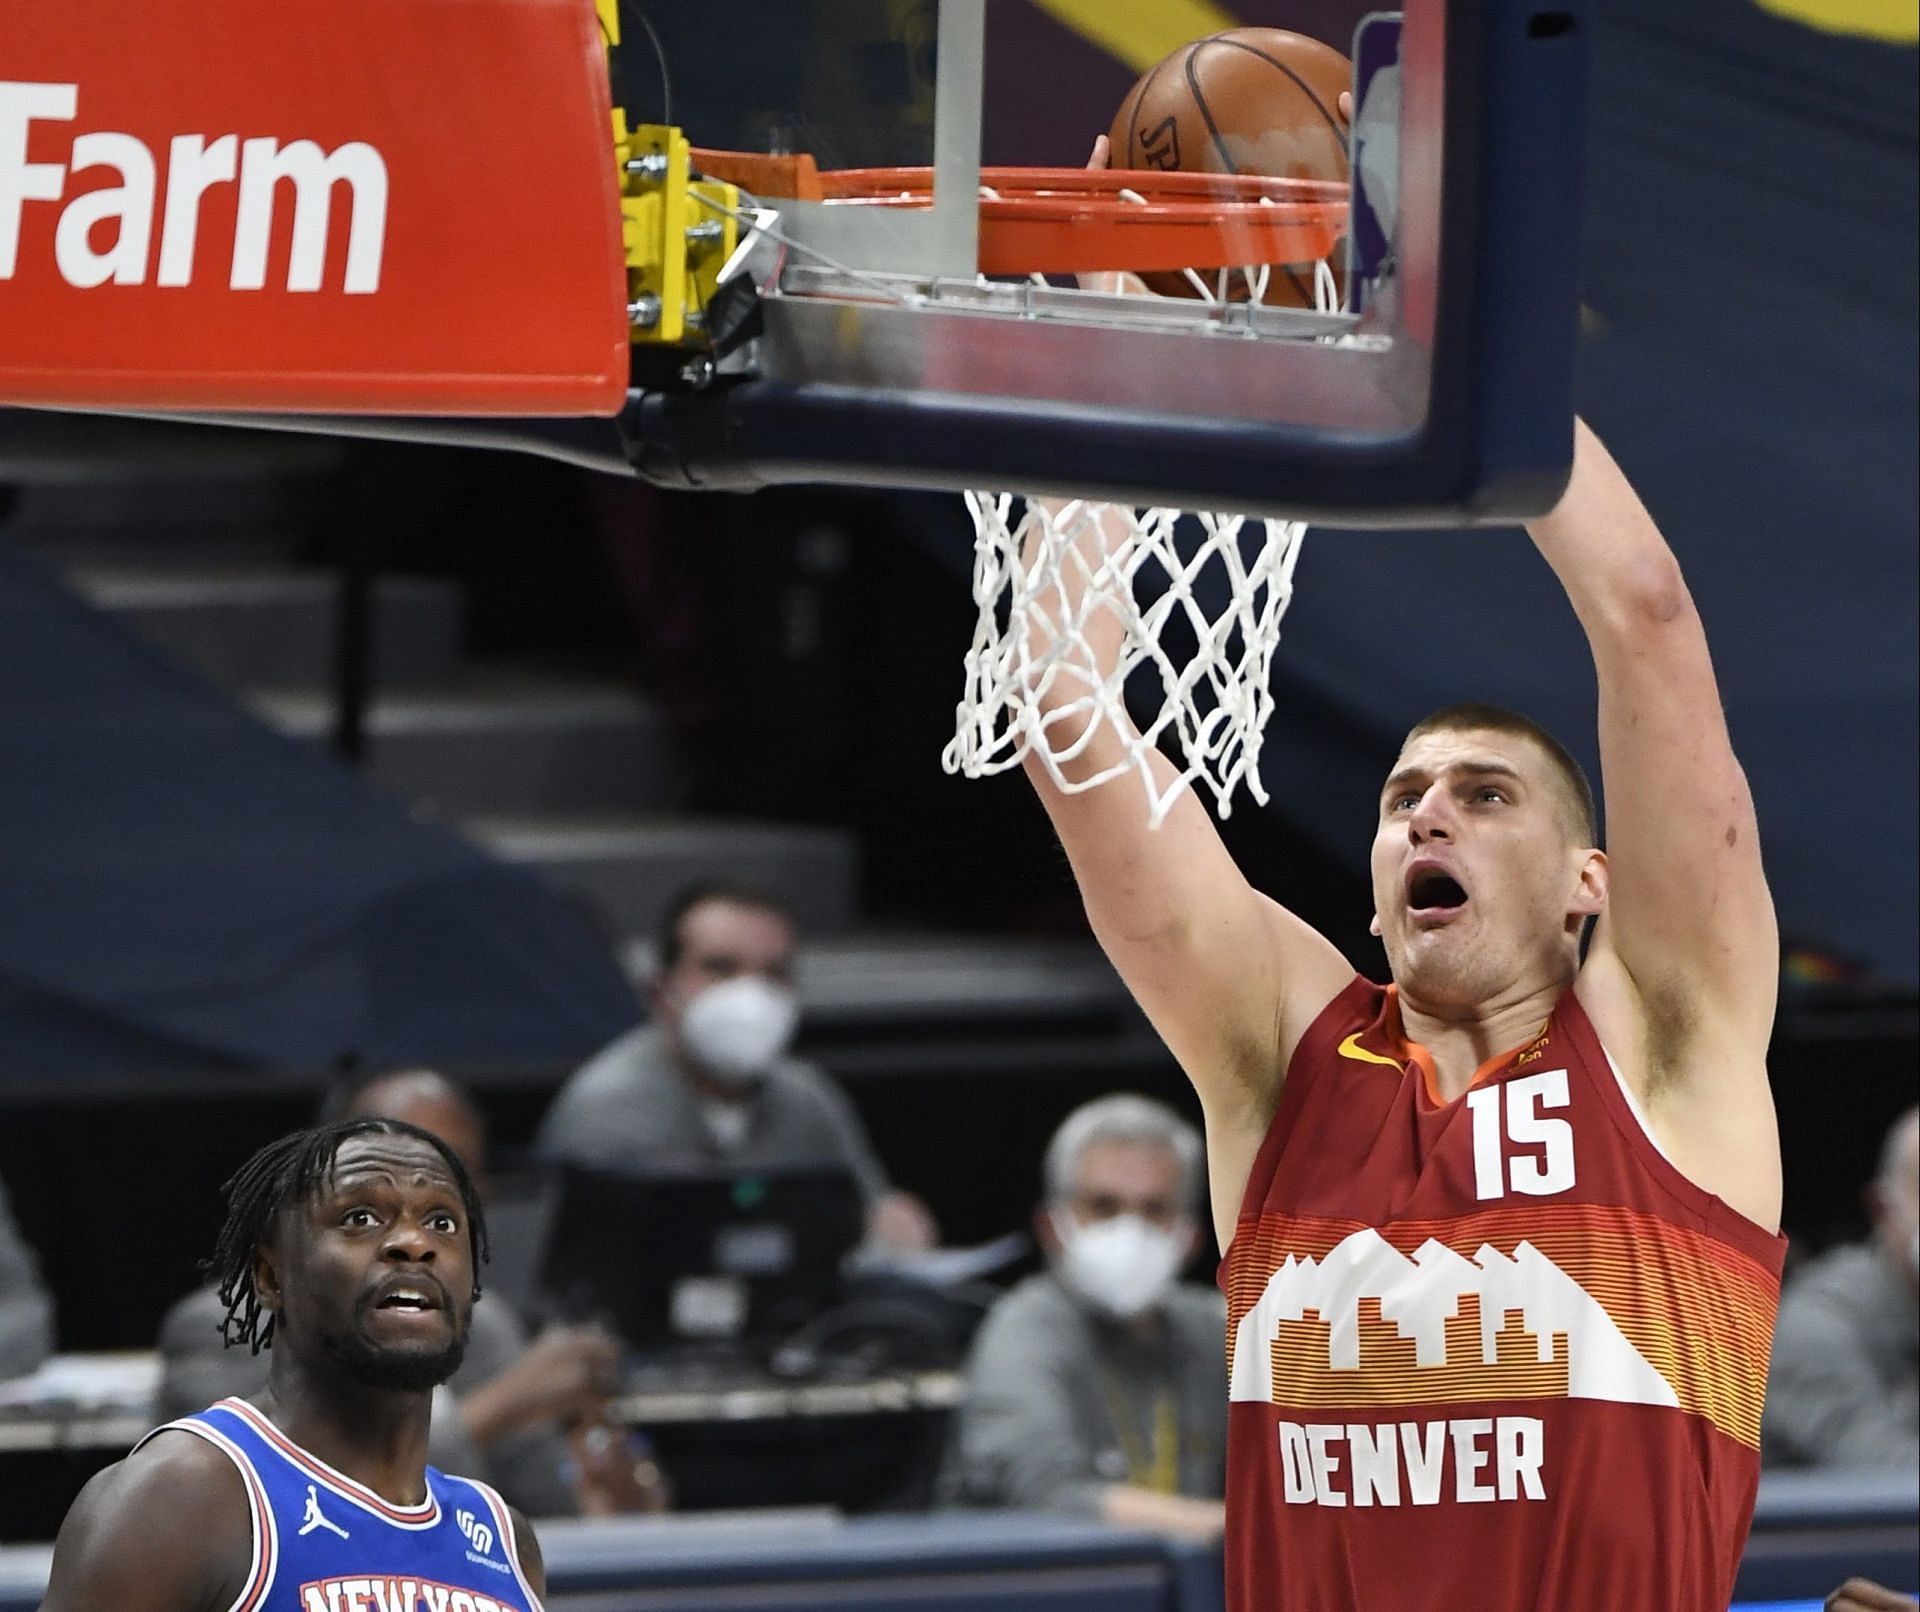 The New York Knicks will host reigning MVP Nikola Jokic and the Denver Nuggets on Saturday at Madison Square Garden [Photo: The Denver Post]